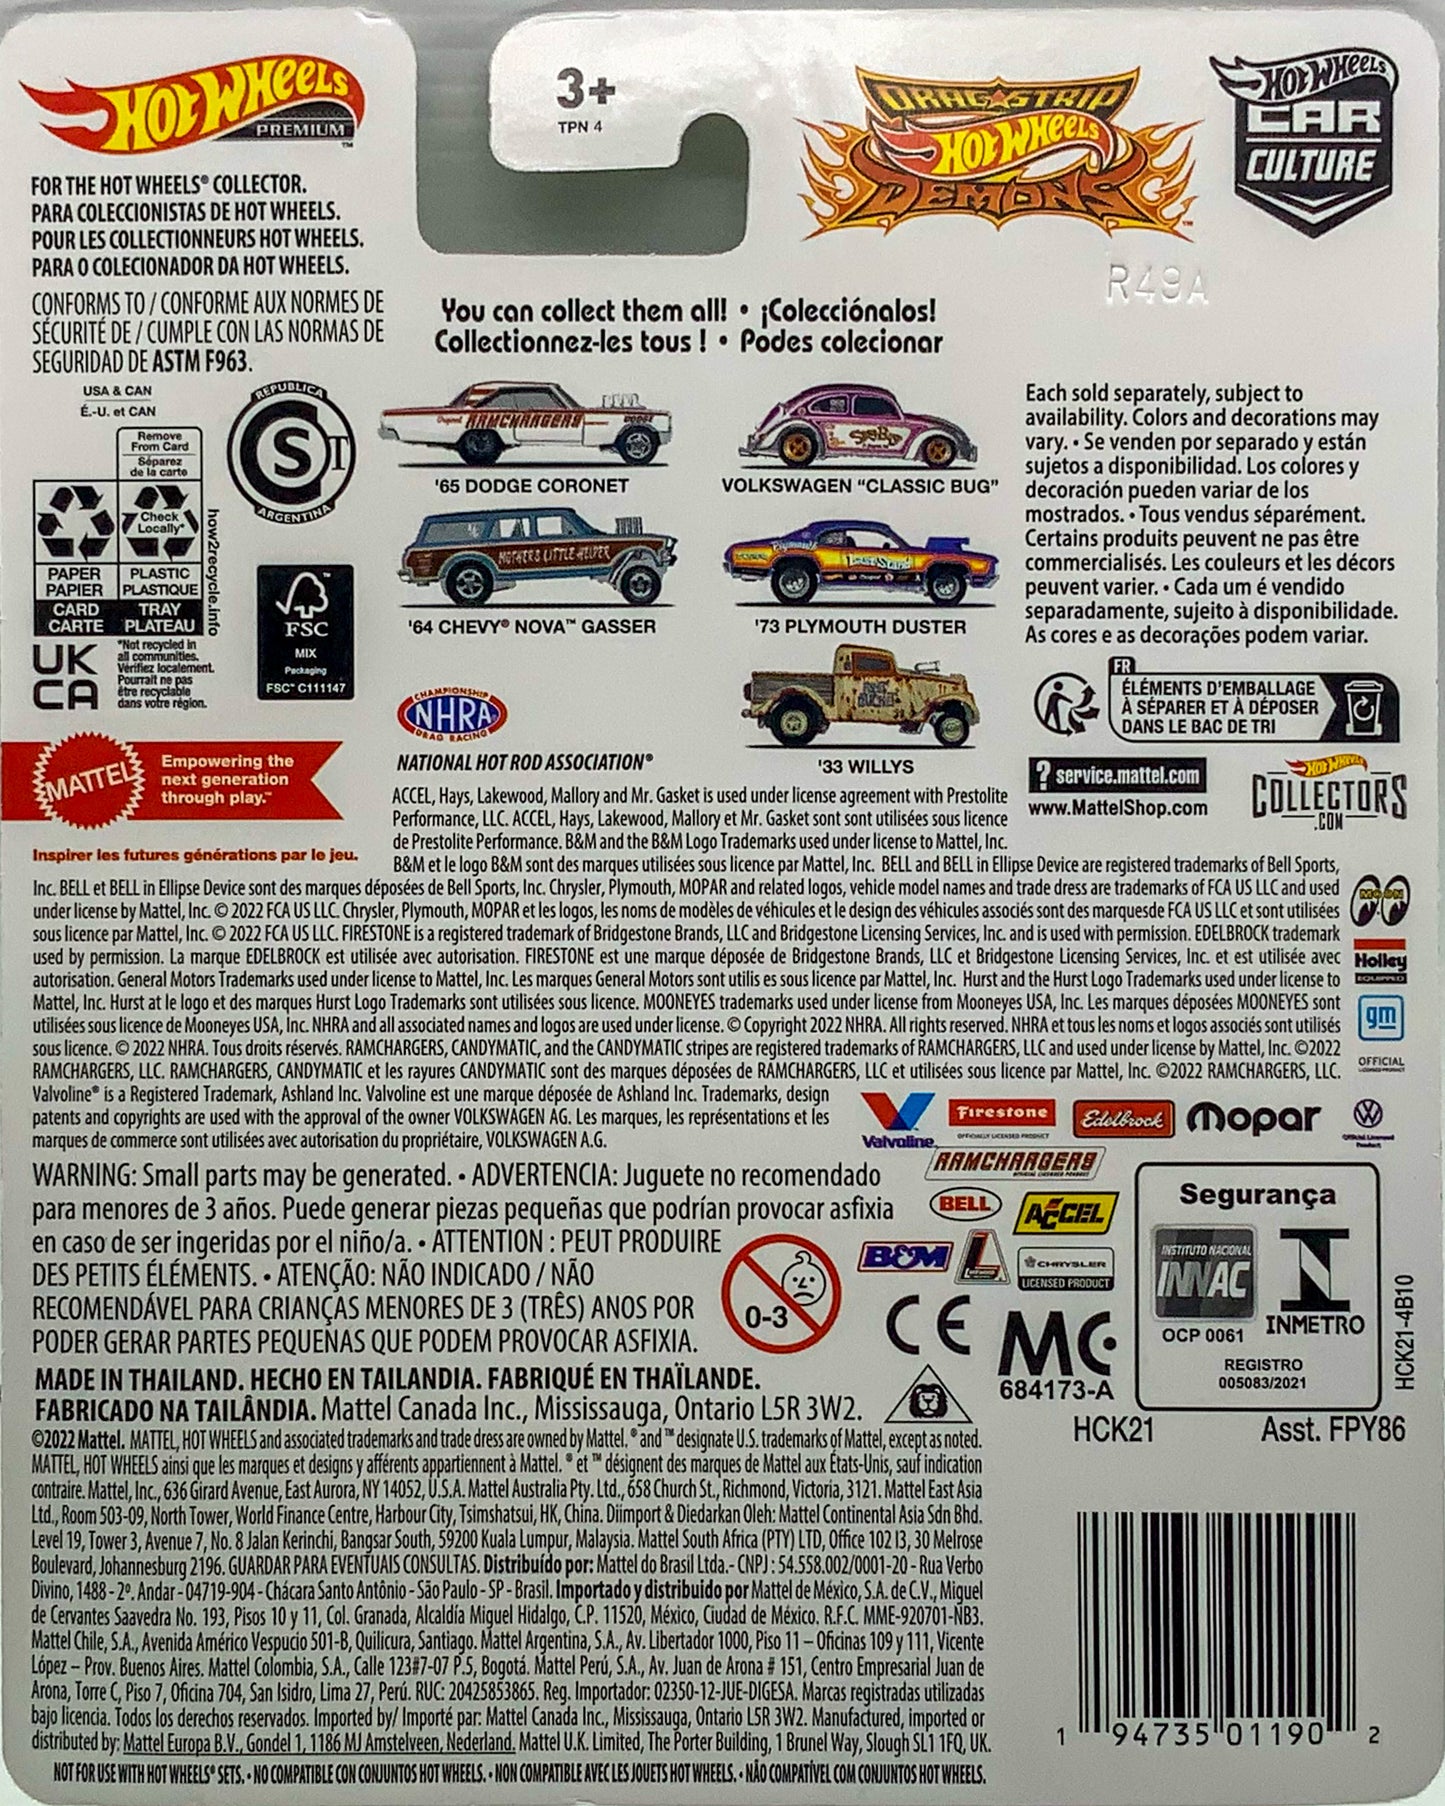 Buy at Tatoyshop.com Products Direct from Shipper Manufacturer Box Made in Thailand Hot Wheels Cars Toys Mattel FPY86 00887961619805   Buy at www.tatoyshop.com Back of the Card shows the 5 Cars on the Series  '65 Dodge Coronet A/FX 1/5 Volkswagen "Classic Bug" 2/5 '64 Chevy Nova Wagon Gasser 3/5 '73 Plymouth Duster 4/5 '33 Willys 5/5